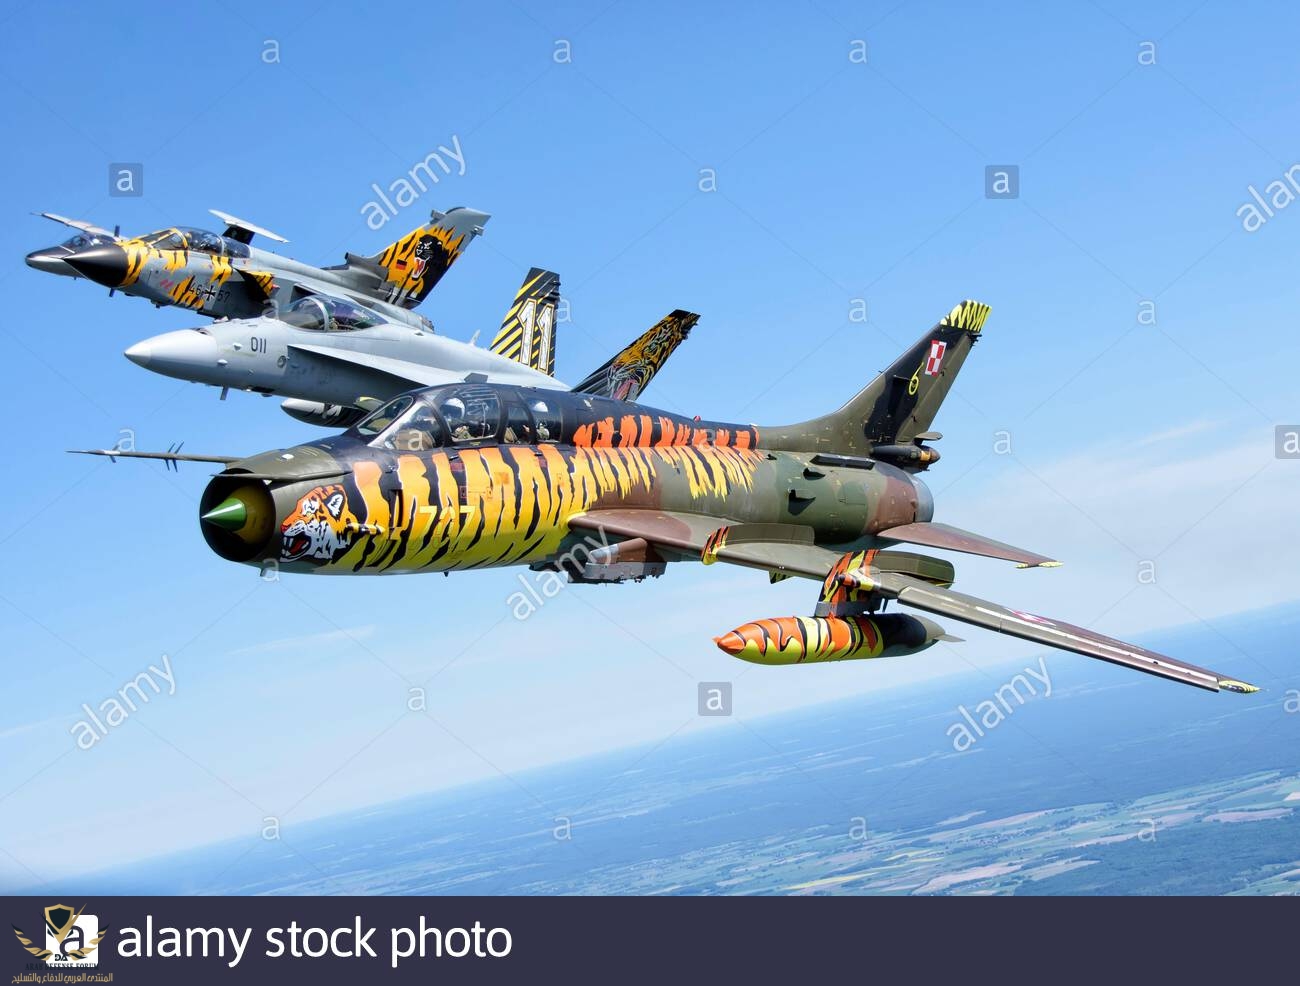 mix-formation-of-jets-during-exercise-nato-tiger-meet-2018-poland-2BET0R9.jpg